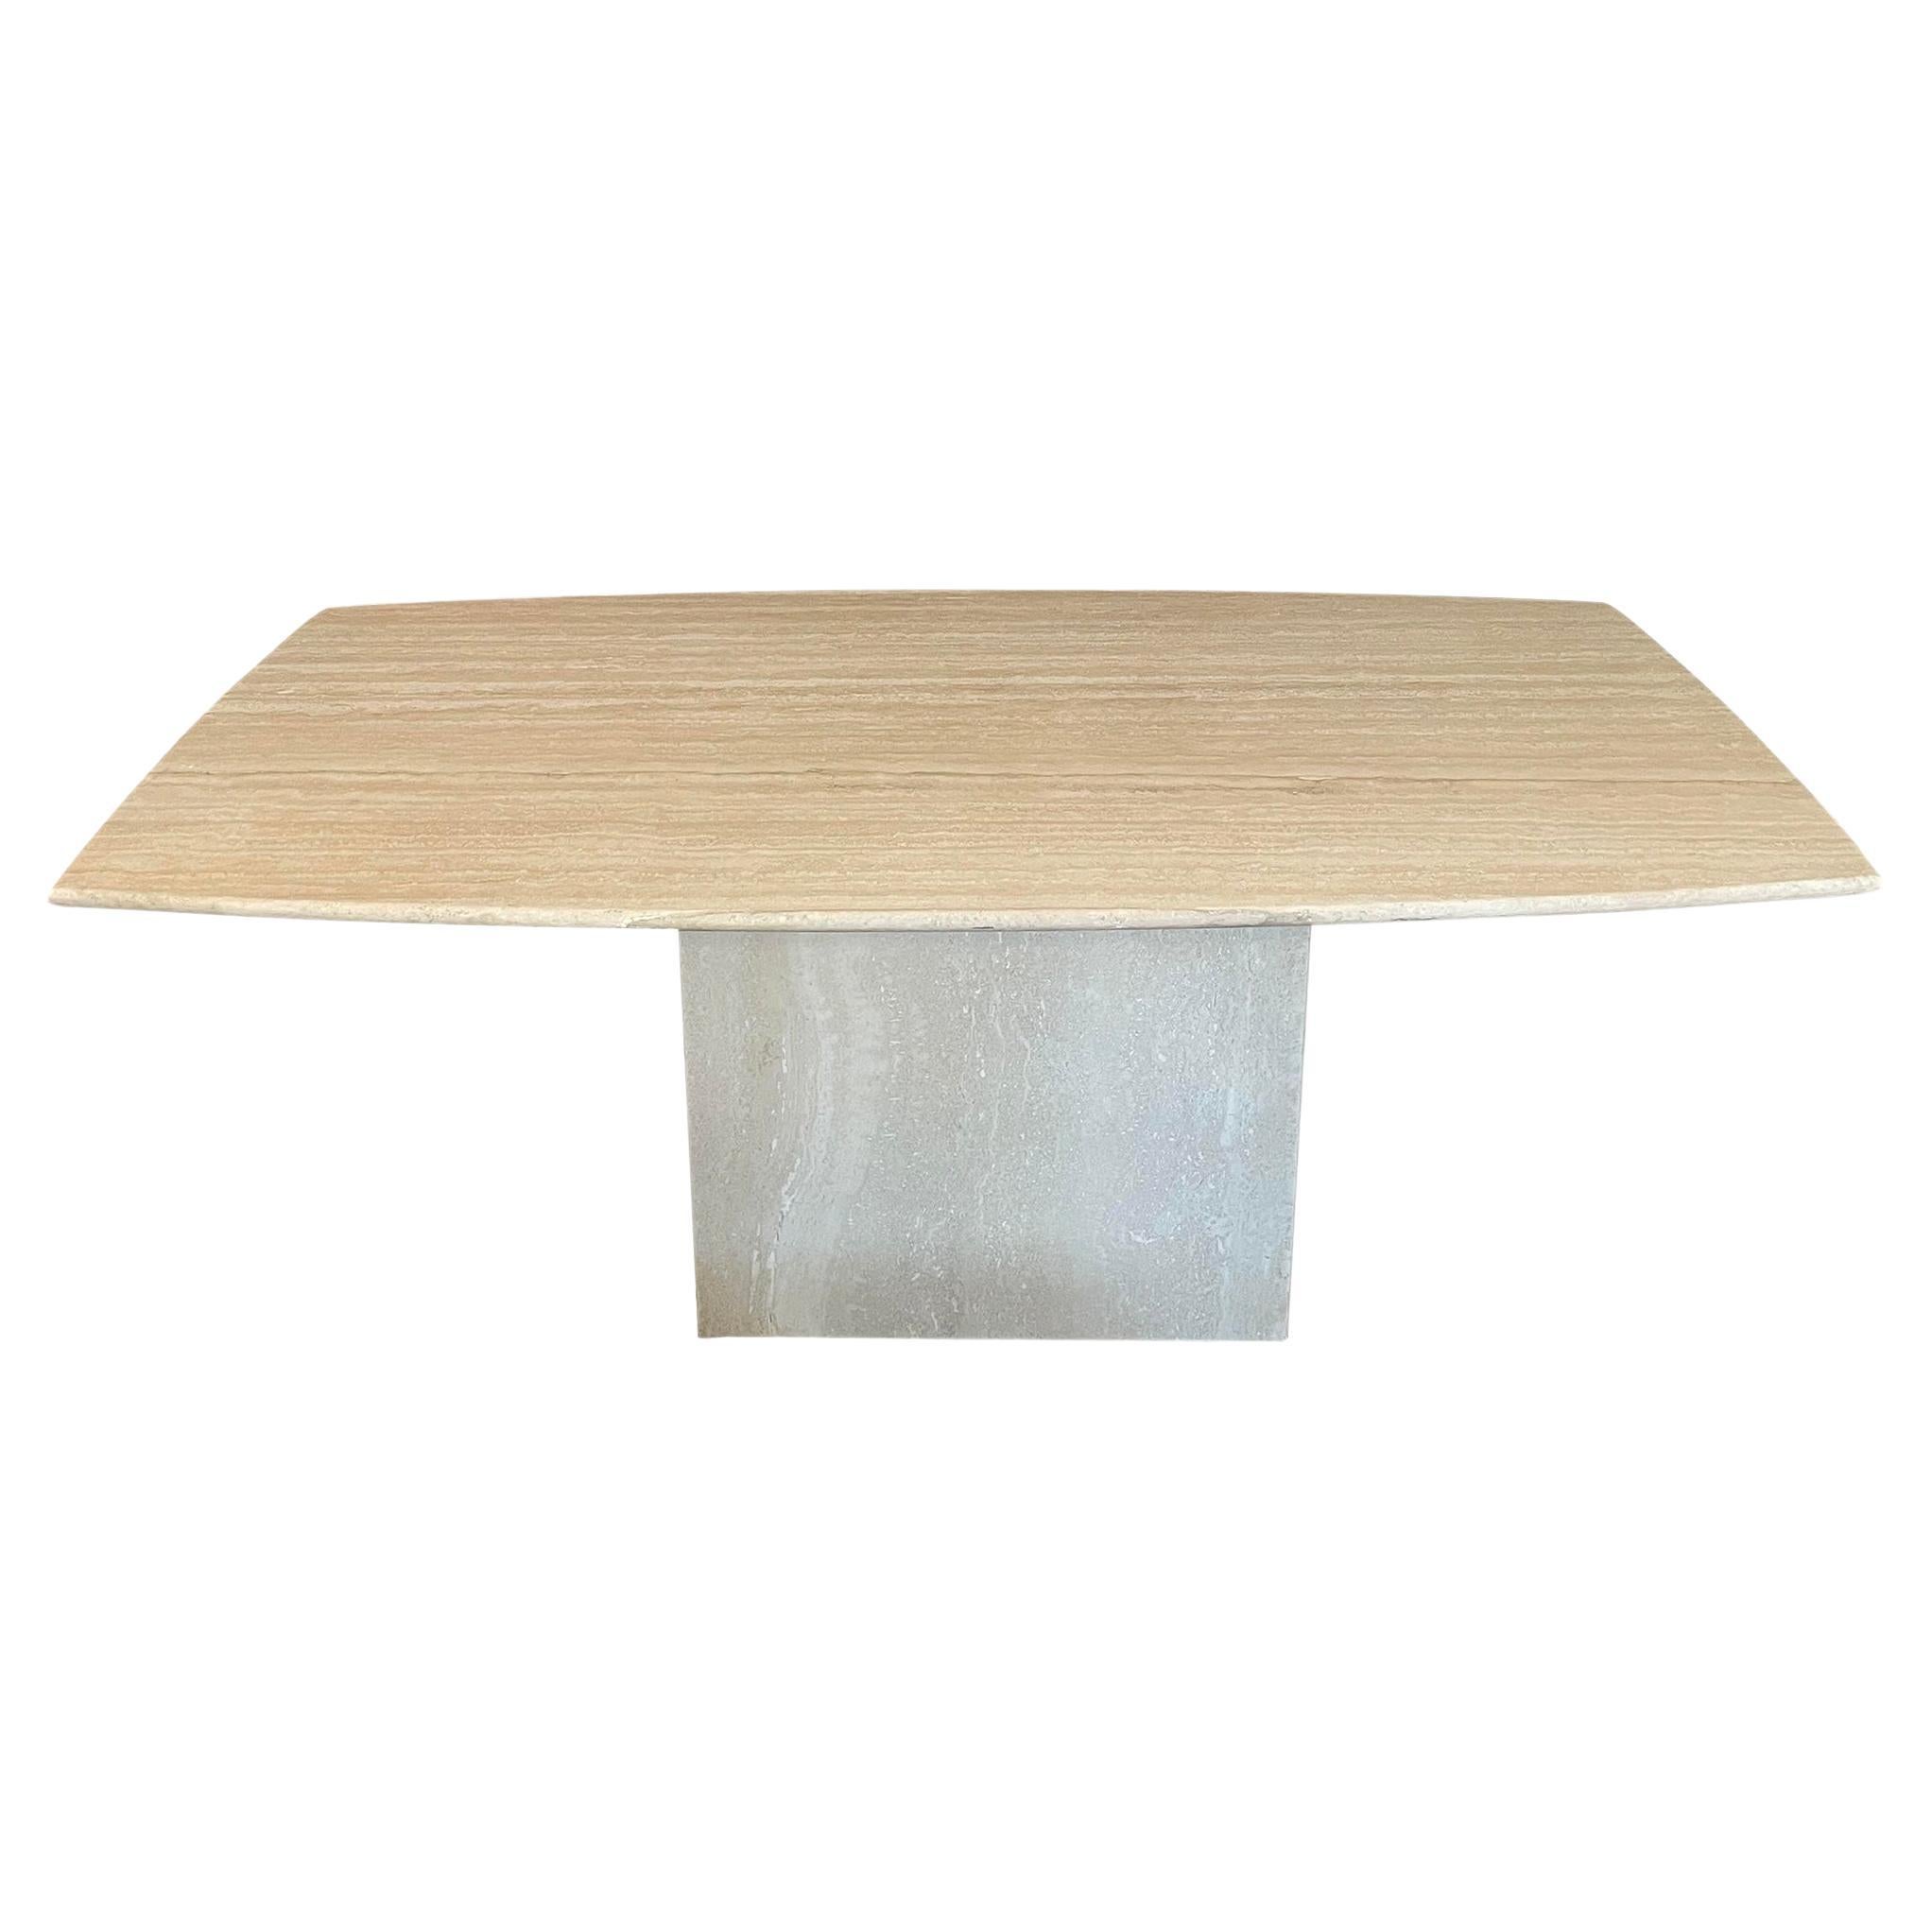 1980s Postmodern Honed Travertine Dining Table For Sale